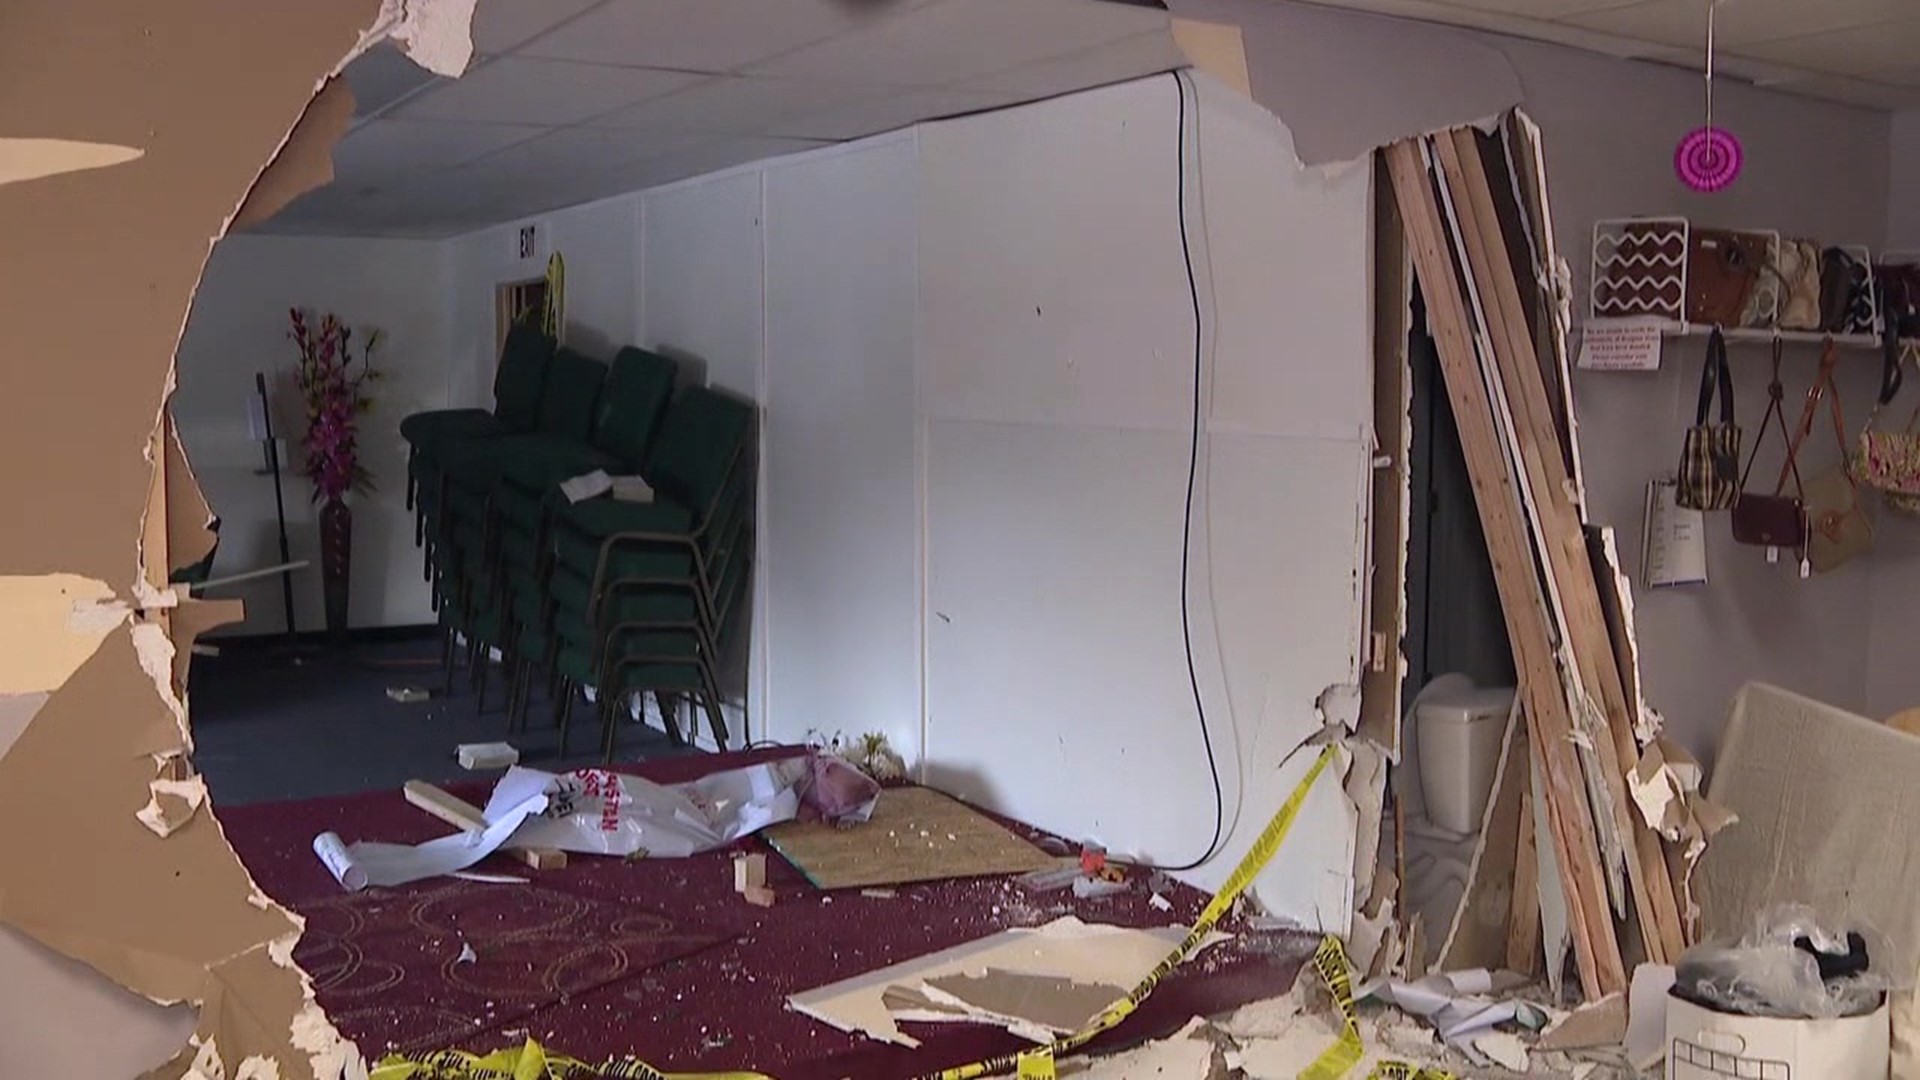 A big mess was left behind after a car crashed into a building in the Poconos. The place helps women in crisis and now the organization needs help.